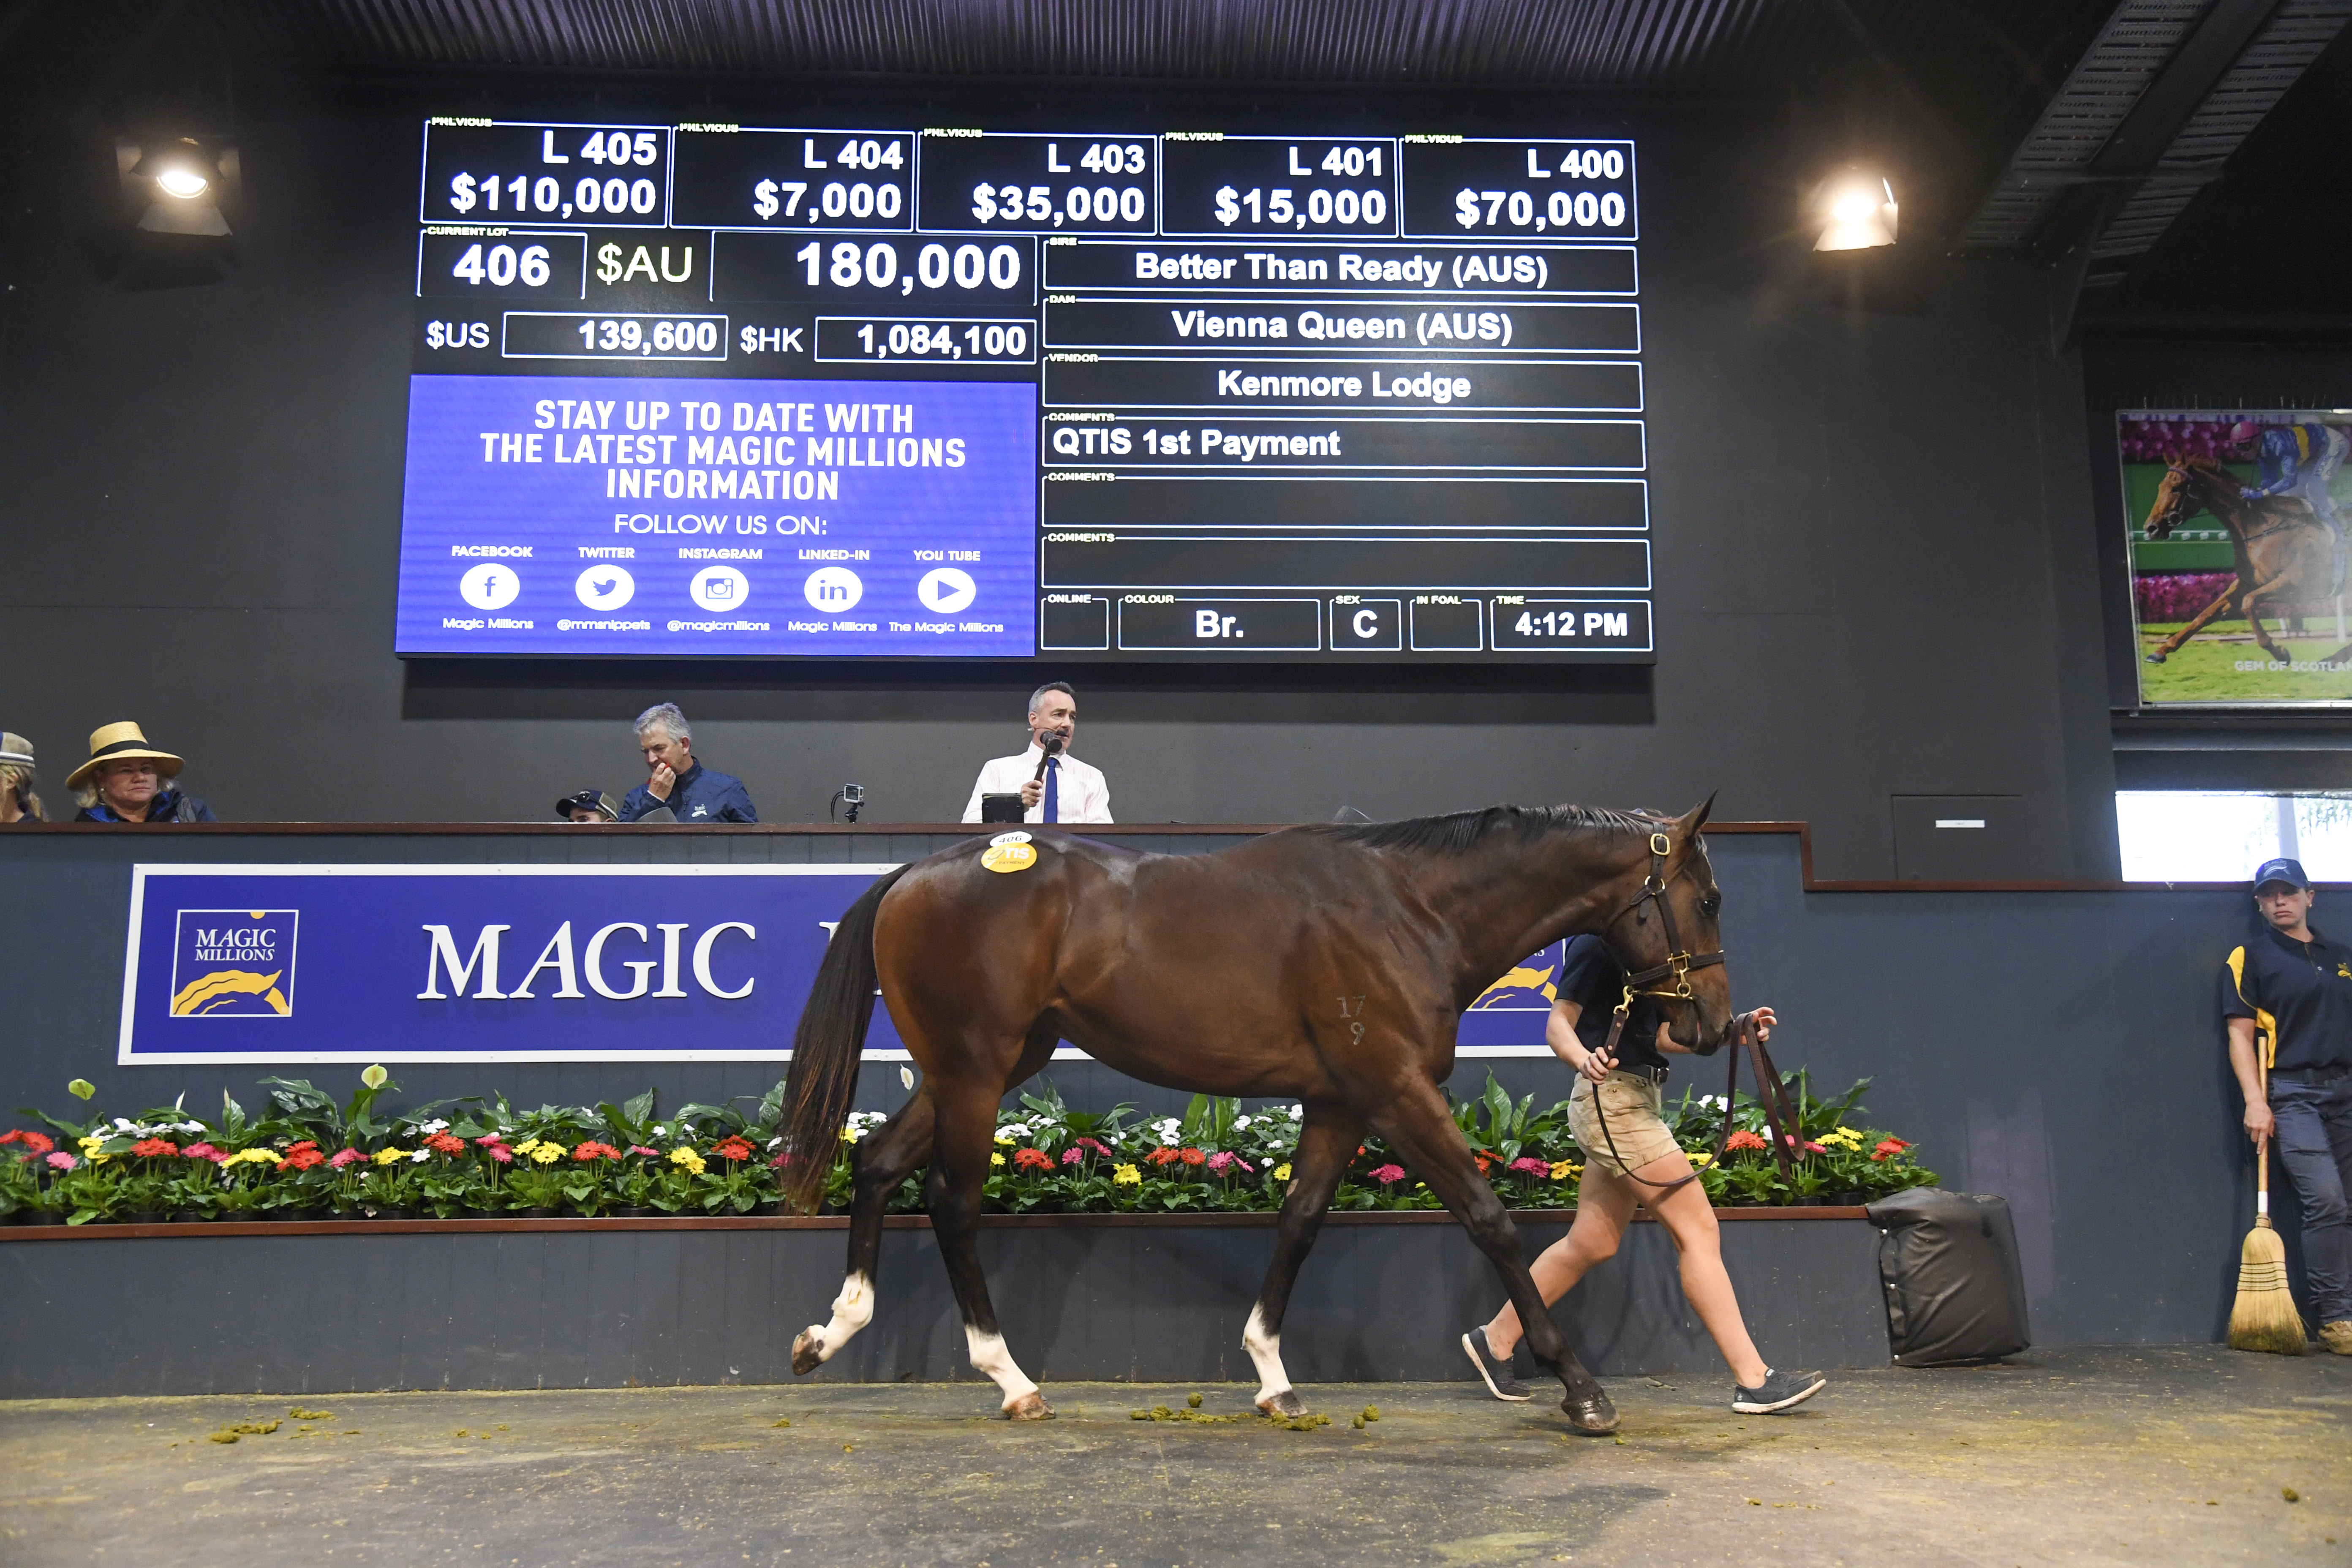 Lot 406 Better Than Ready - Vienna Queen colt. Picture: Magic Millions.